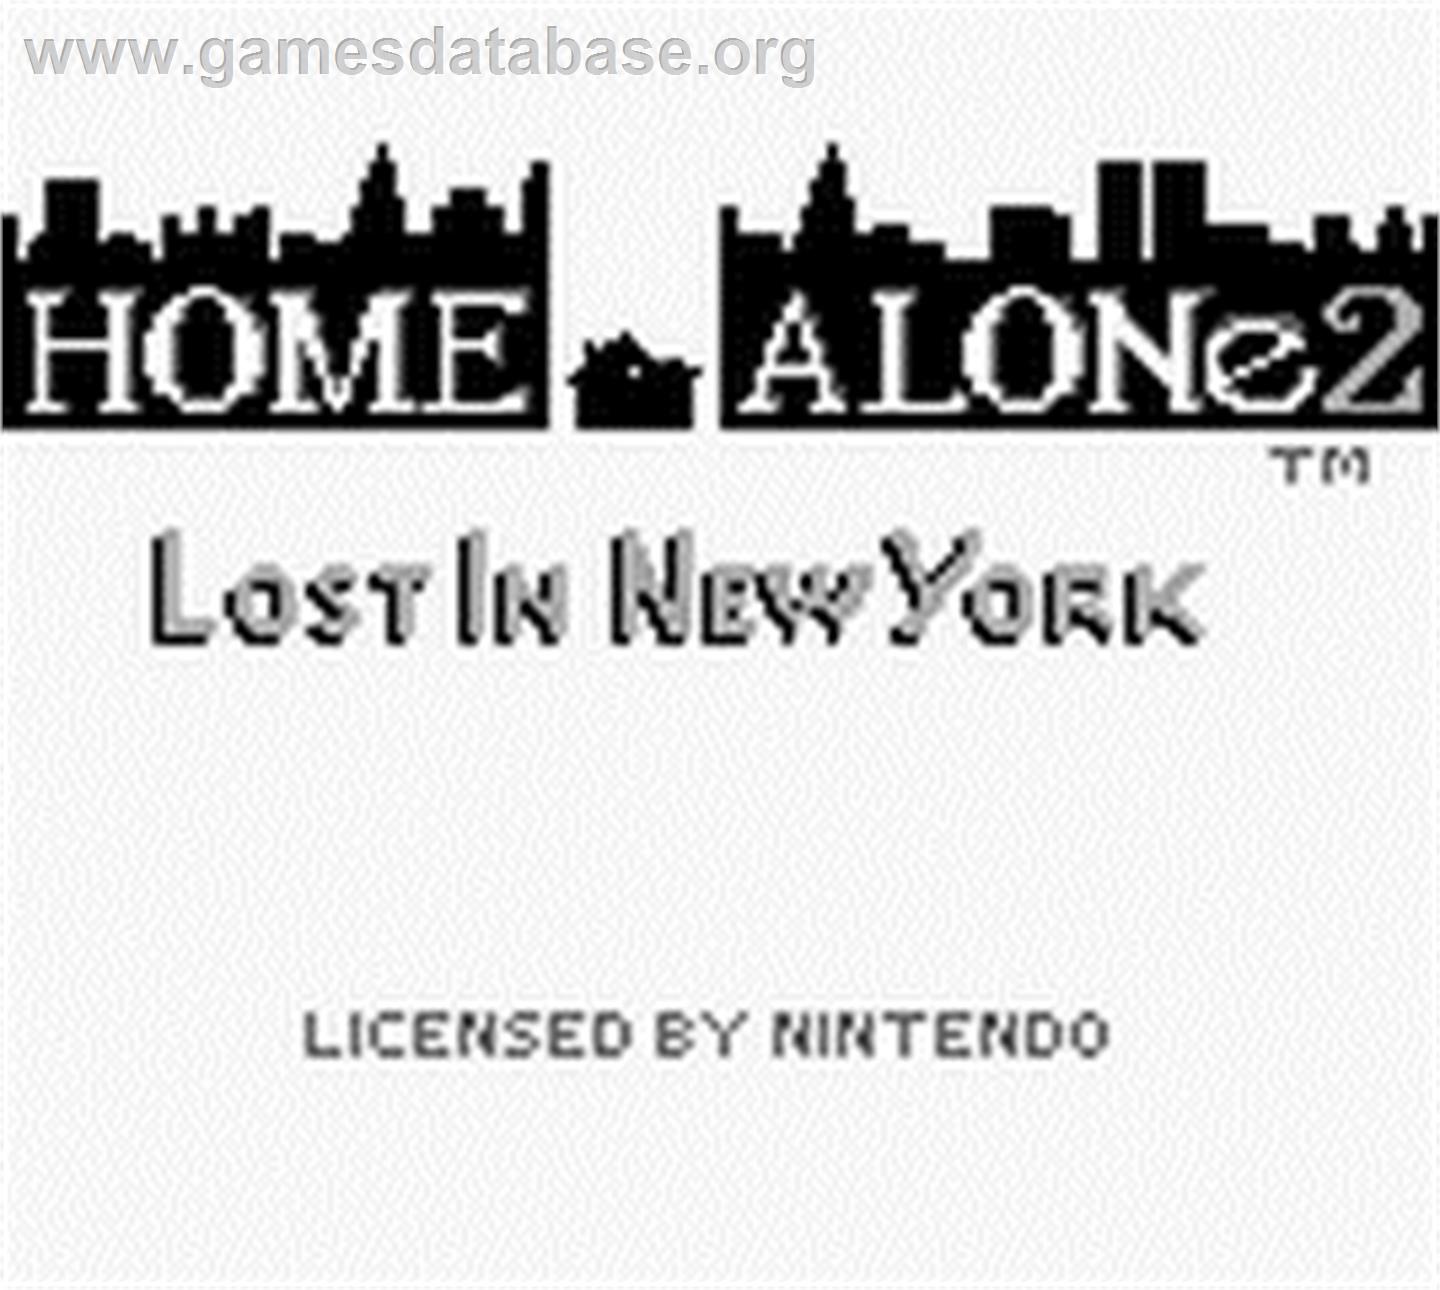 Home Alone 2: Lost in New York - Nintendo Game Boy - Artwork - Title Screen